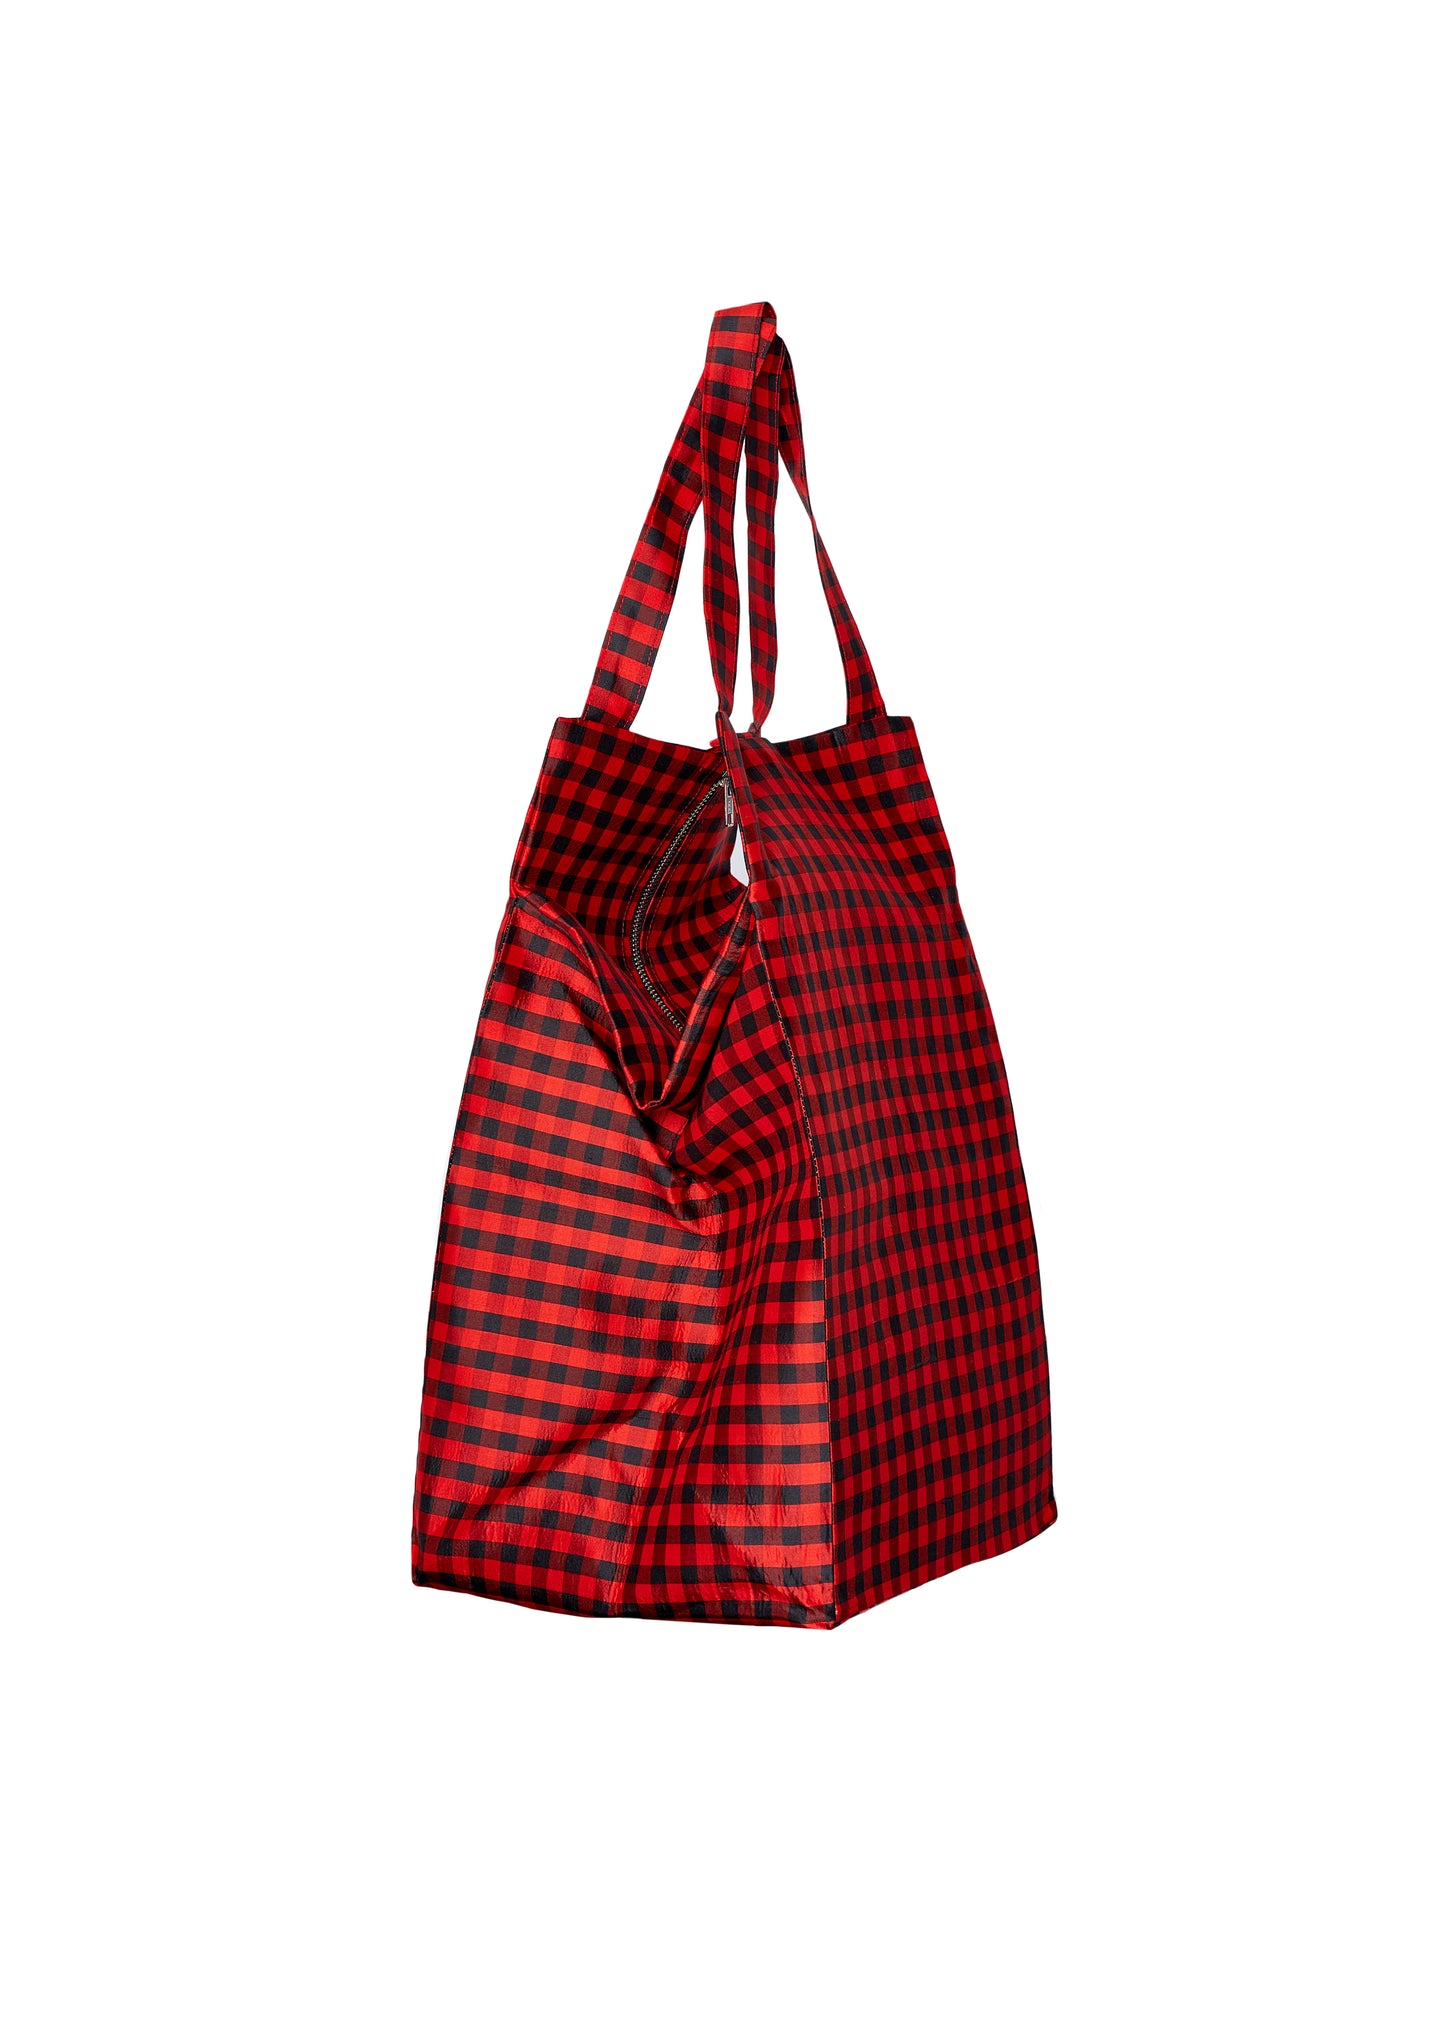 XL GINGHAM RED BROWN EVERYDAY BAG